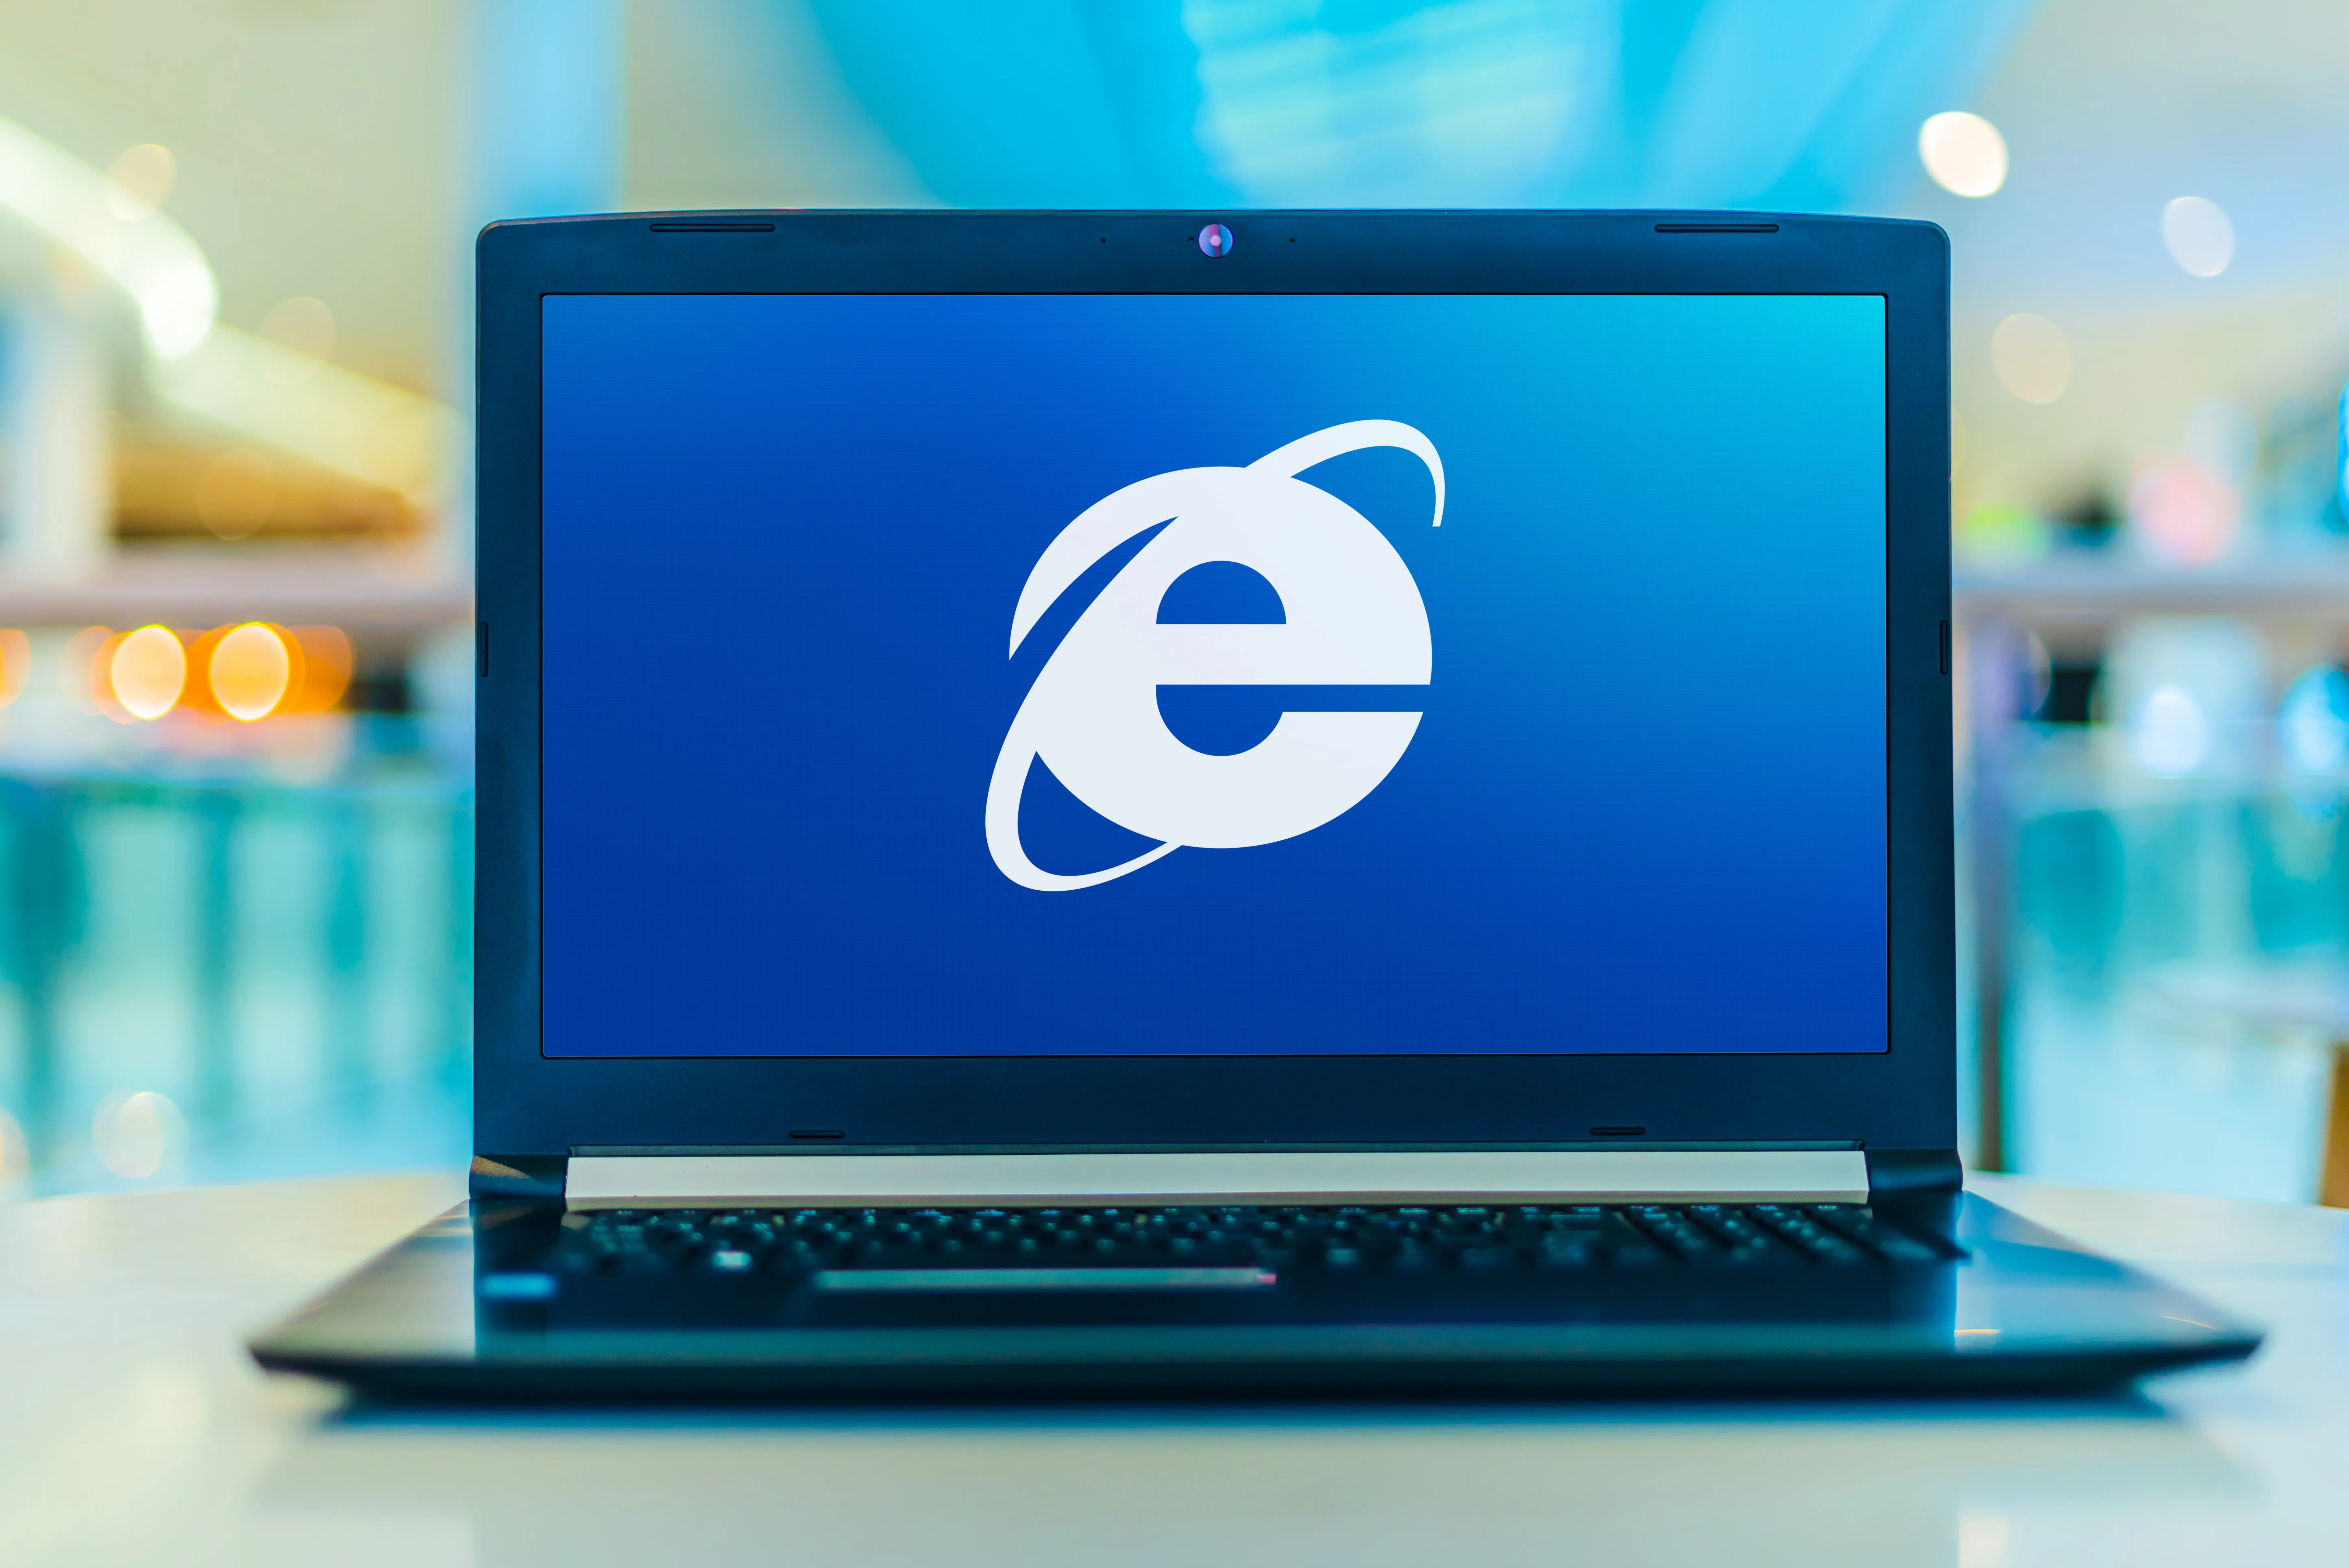 Microsoft Finally Shuts Down Internet Explorer After 27 Years